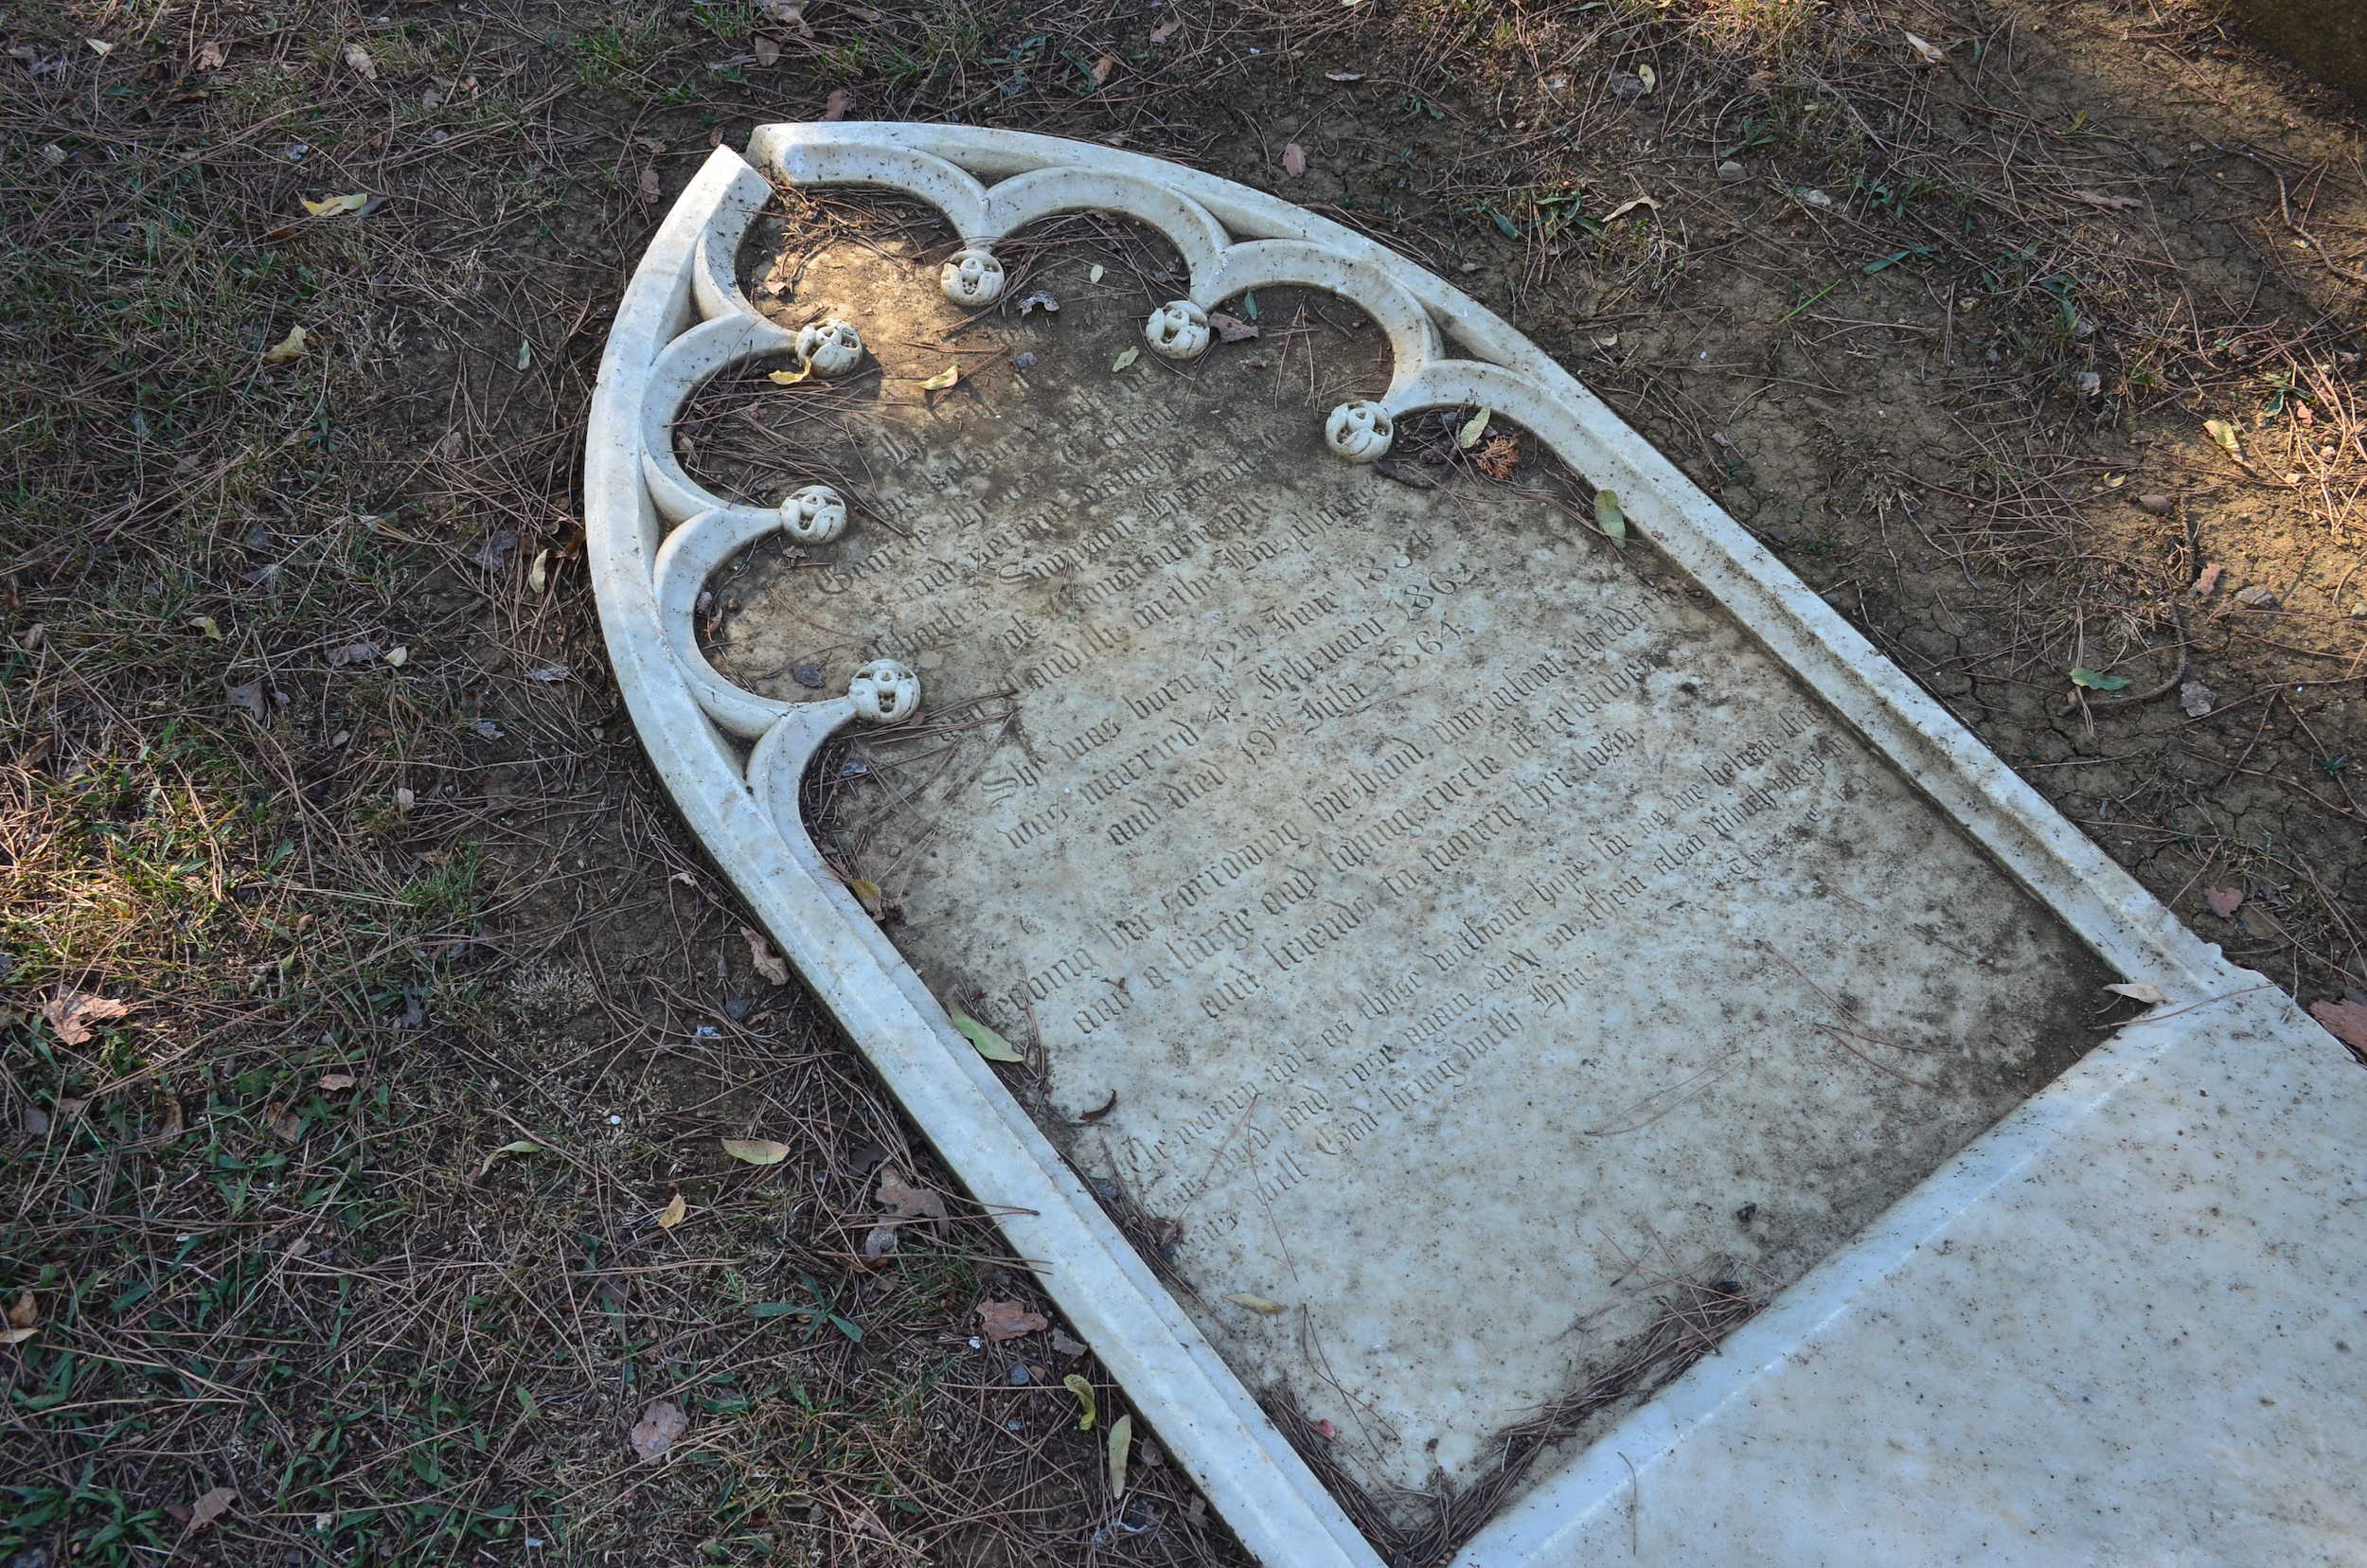 Victorian grave at the Haidar Pasha Cemetery in Istanbul, Turkey